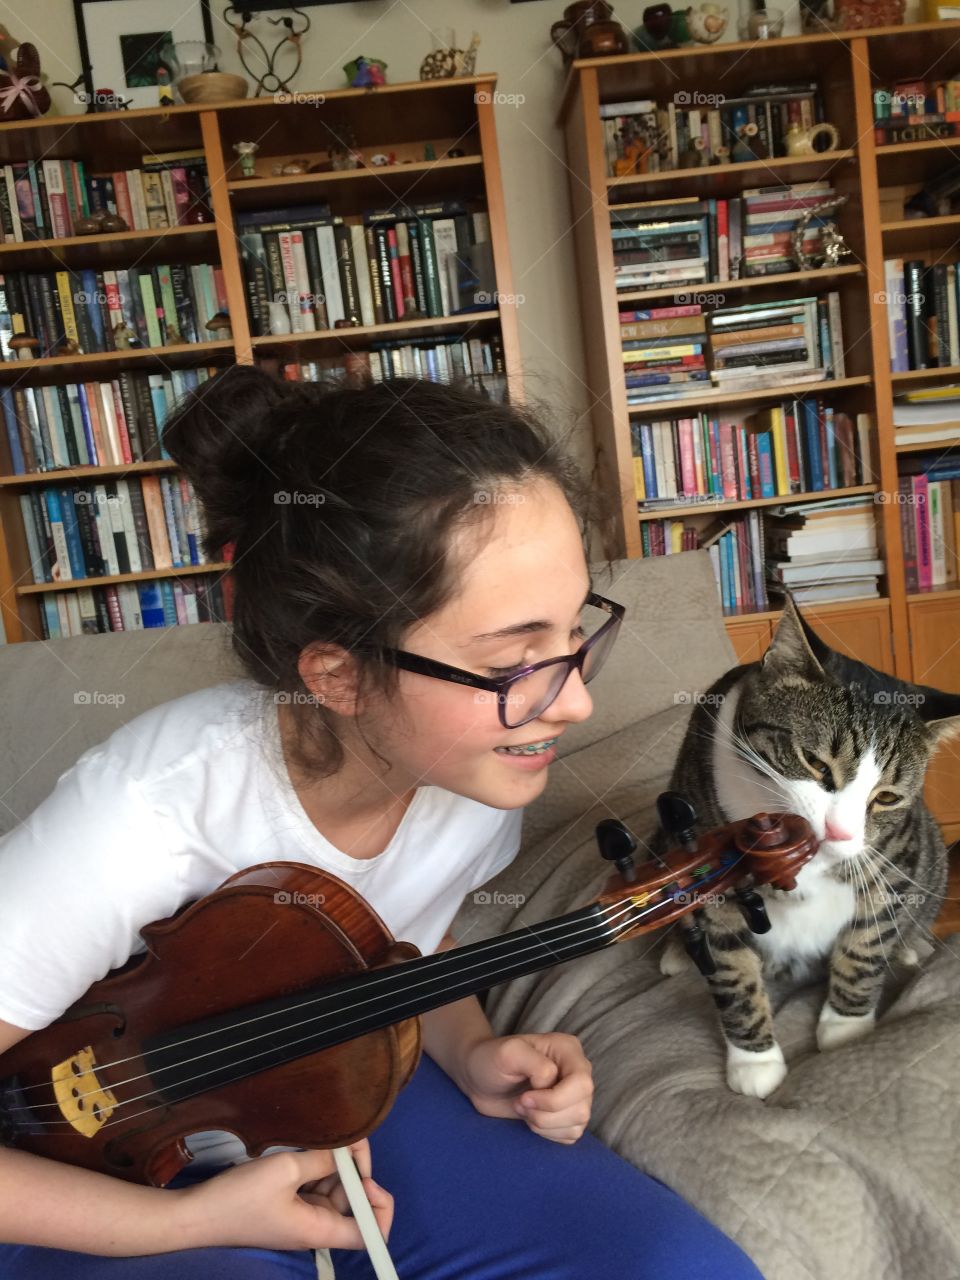 Teenager girl holding guitar sitting on sofa with a cat